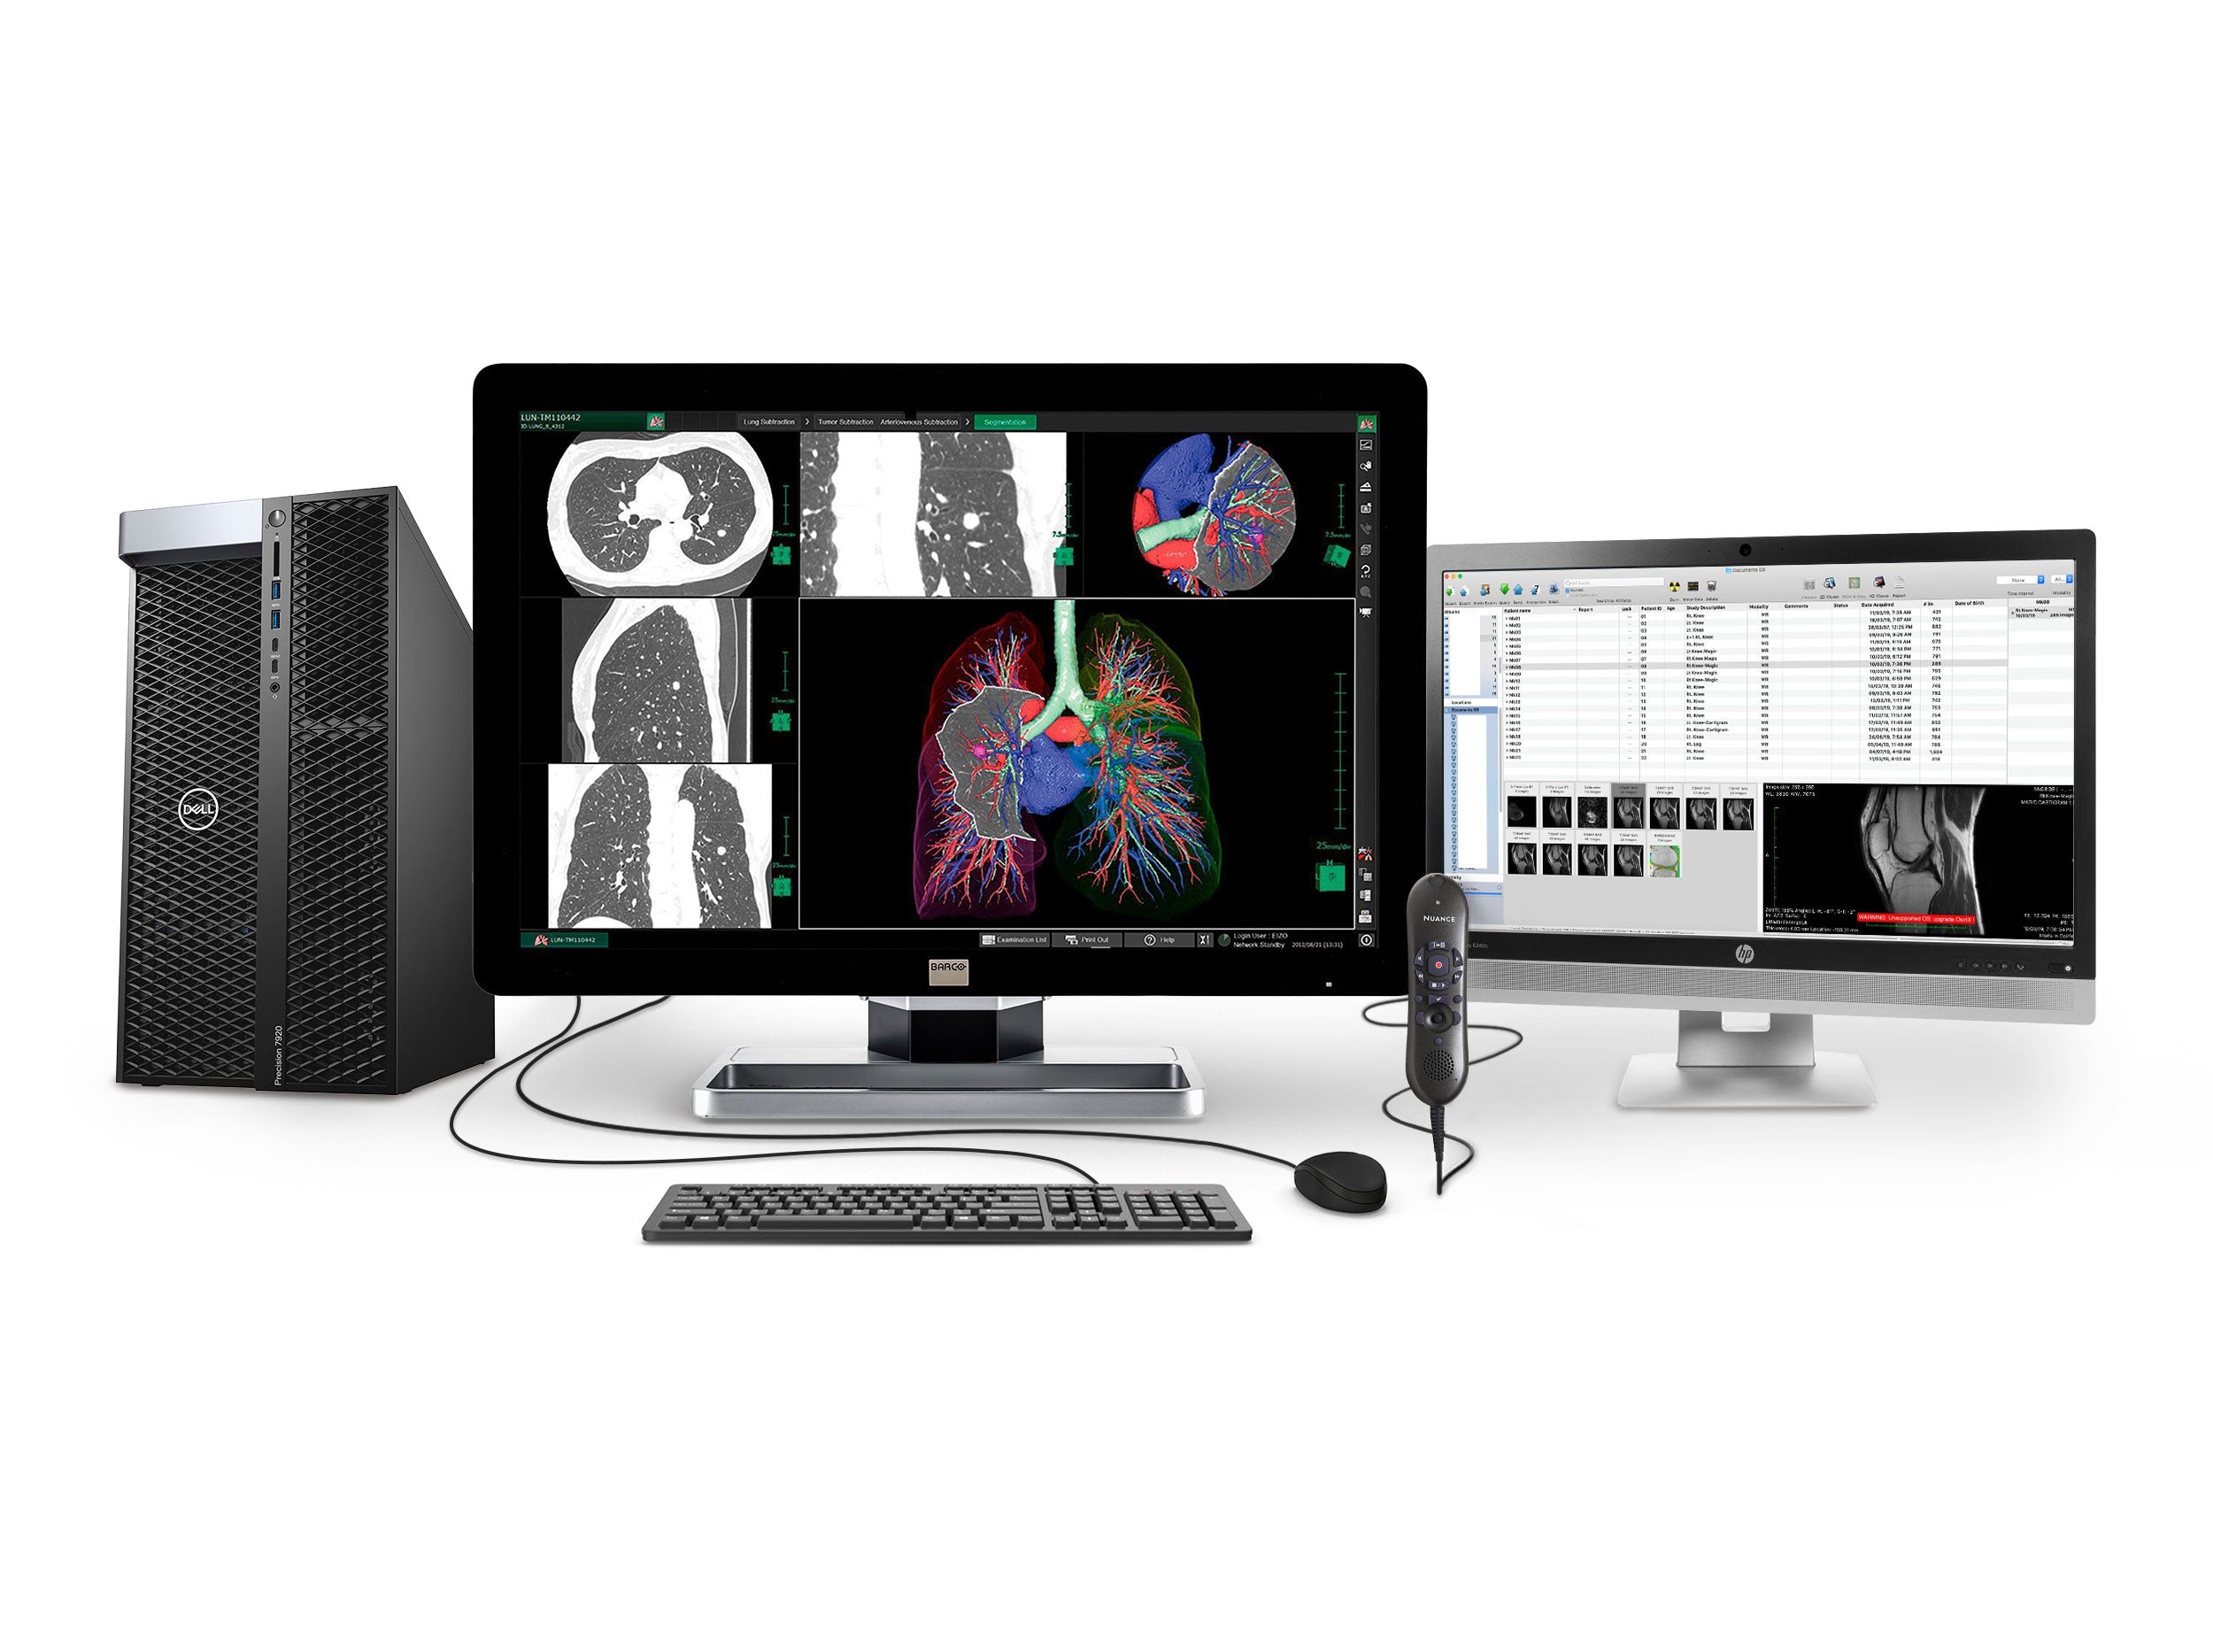 Complete PACS General Radiology Station | Barco 6MP Color LED Display | Dell Workstation | Dictation Mic | Worklist Monitor (63307920) Monitors.com 